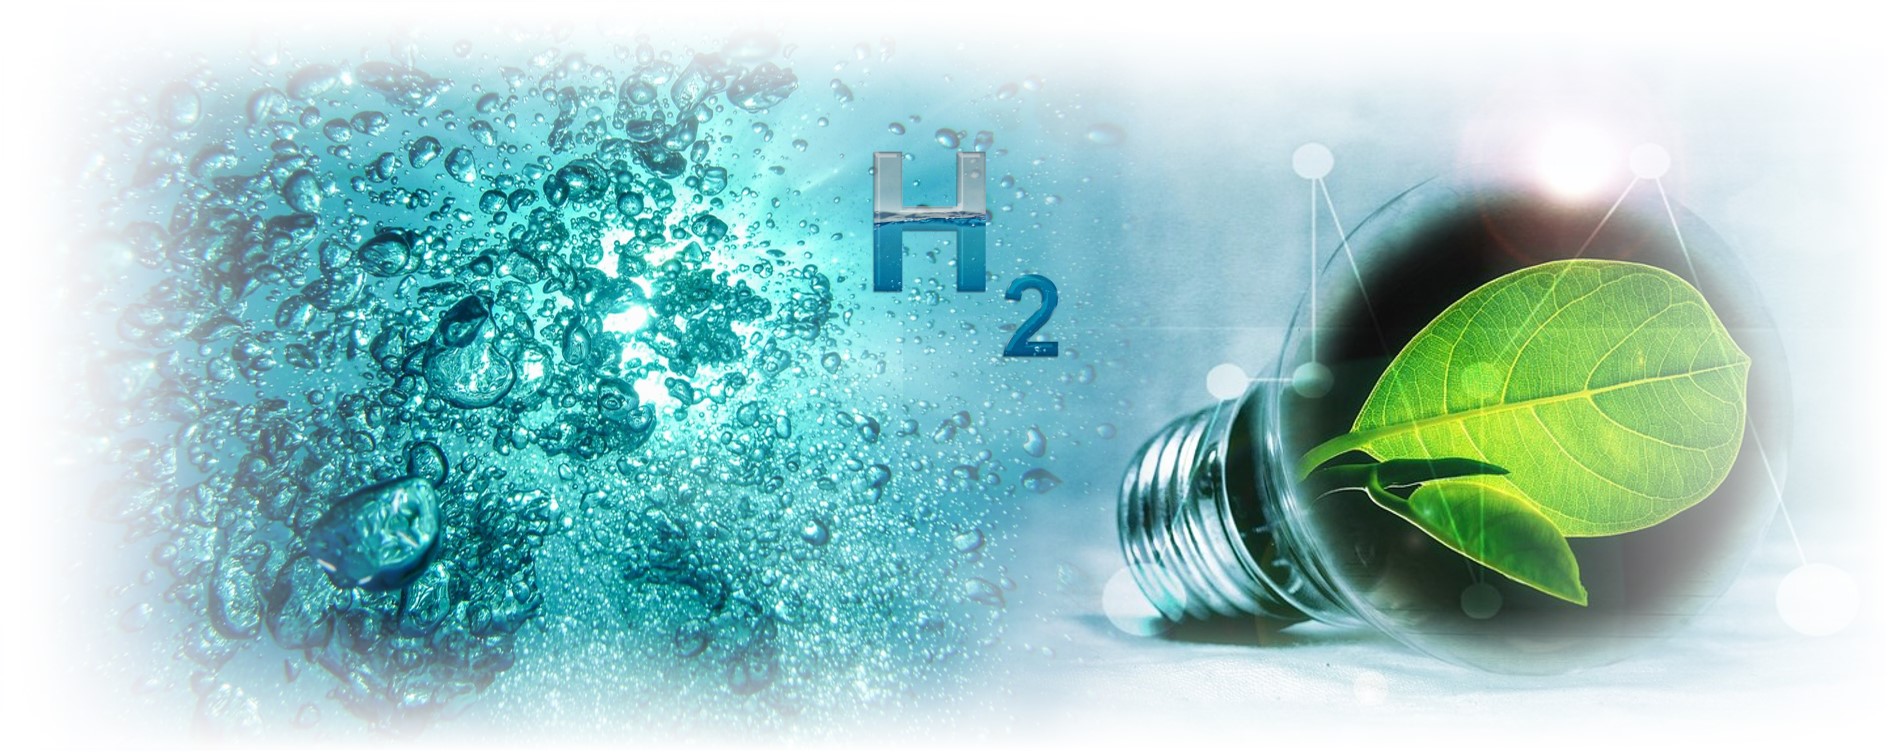 H2 depicted over a body of water